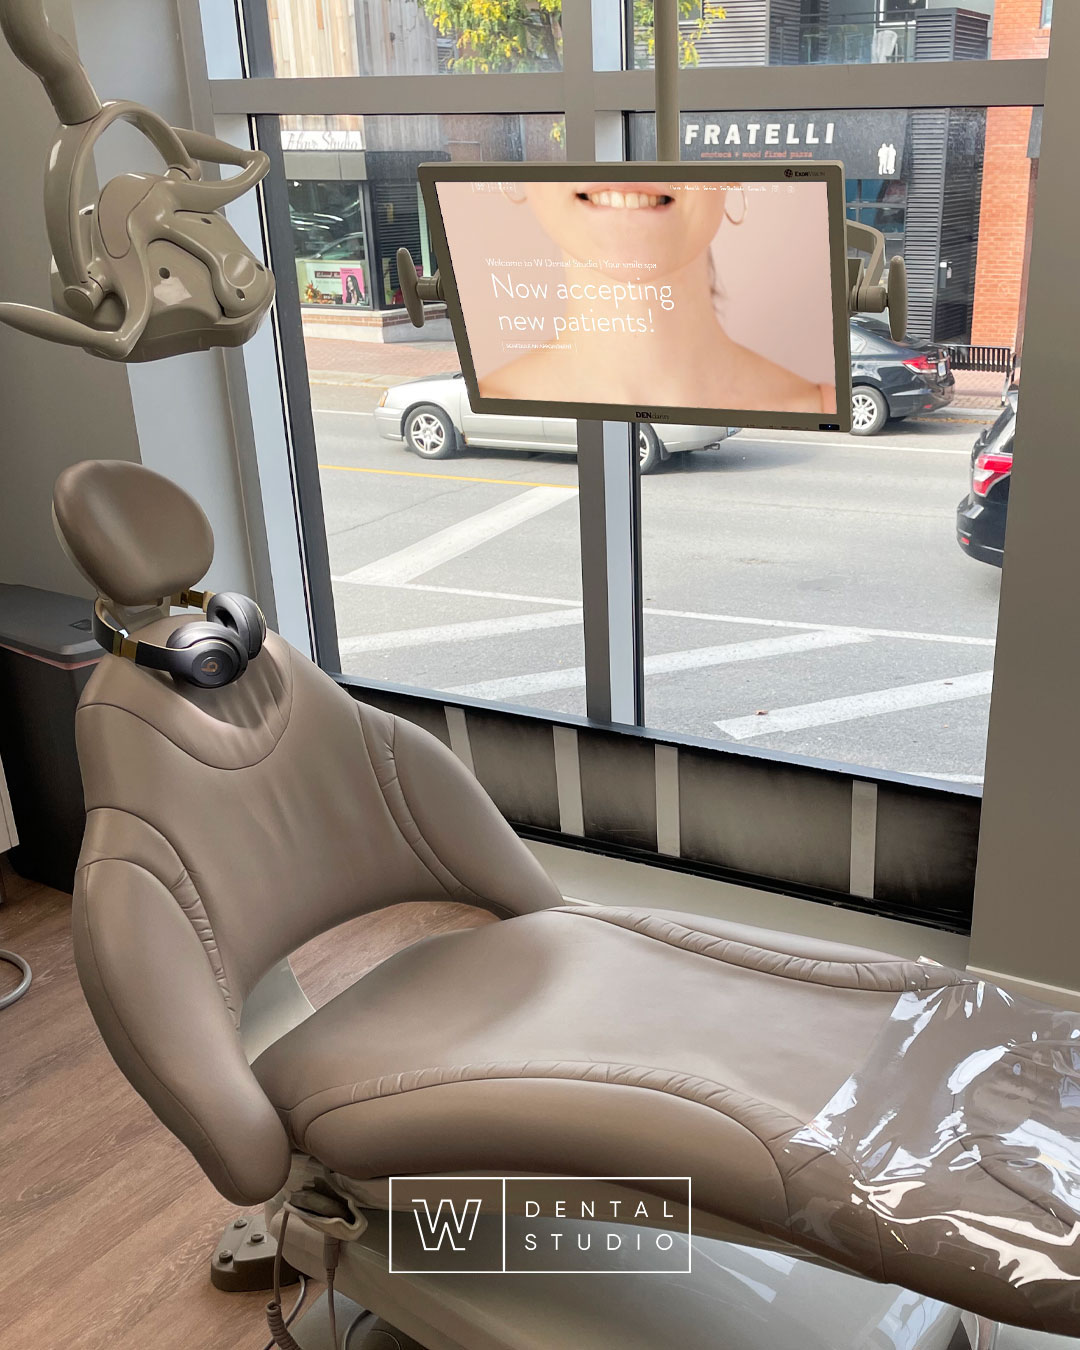 Enjoy a gentle massage in our state of the art chairs at your next dental appointment!⠀
⠀
Tel: 613-564-3300⠀
Email: info@wdentalstudio.com